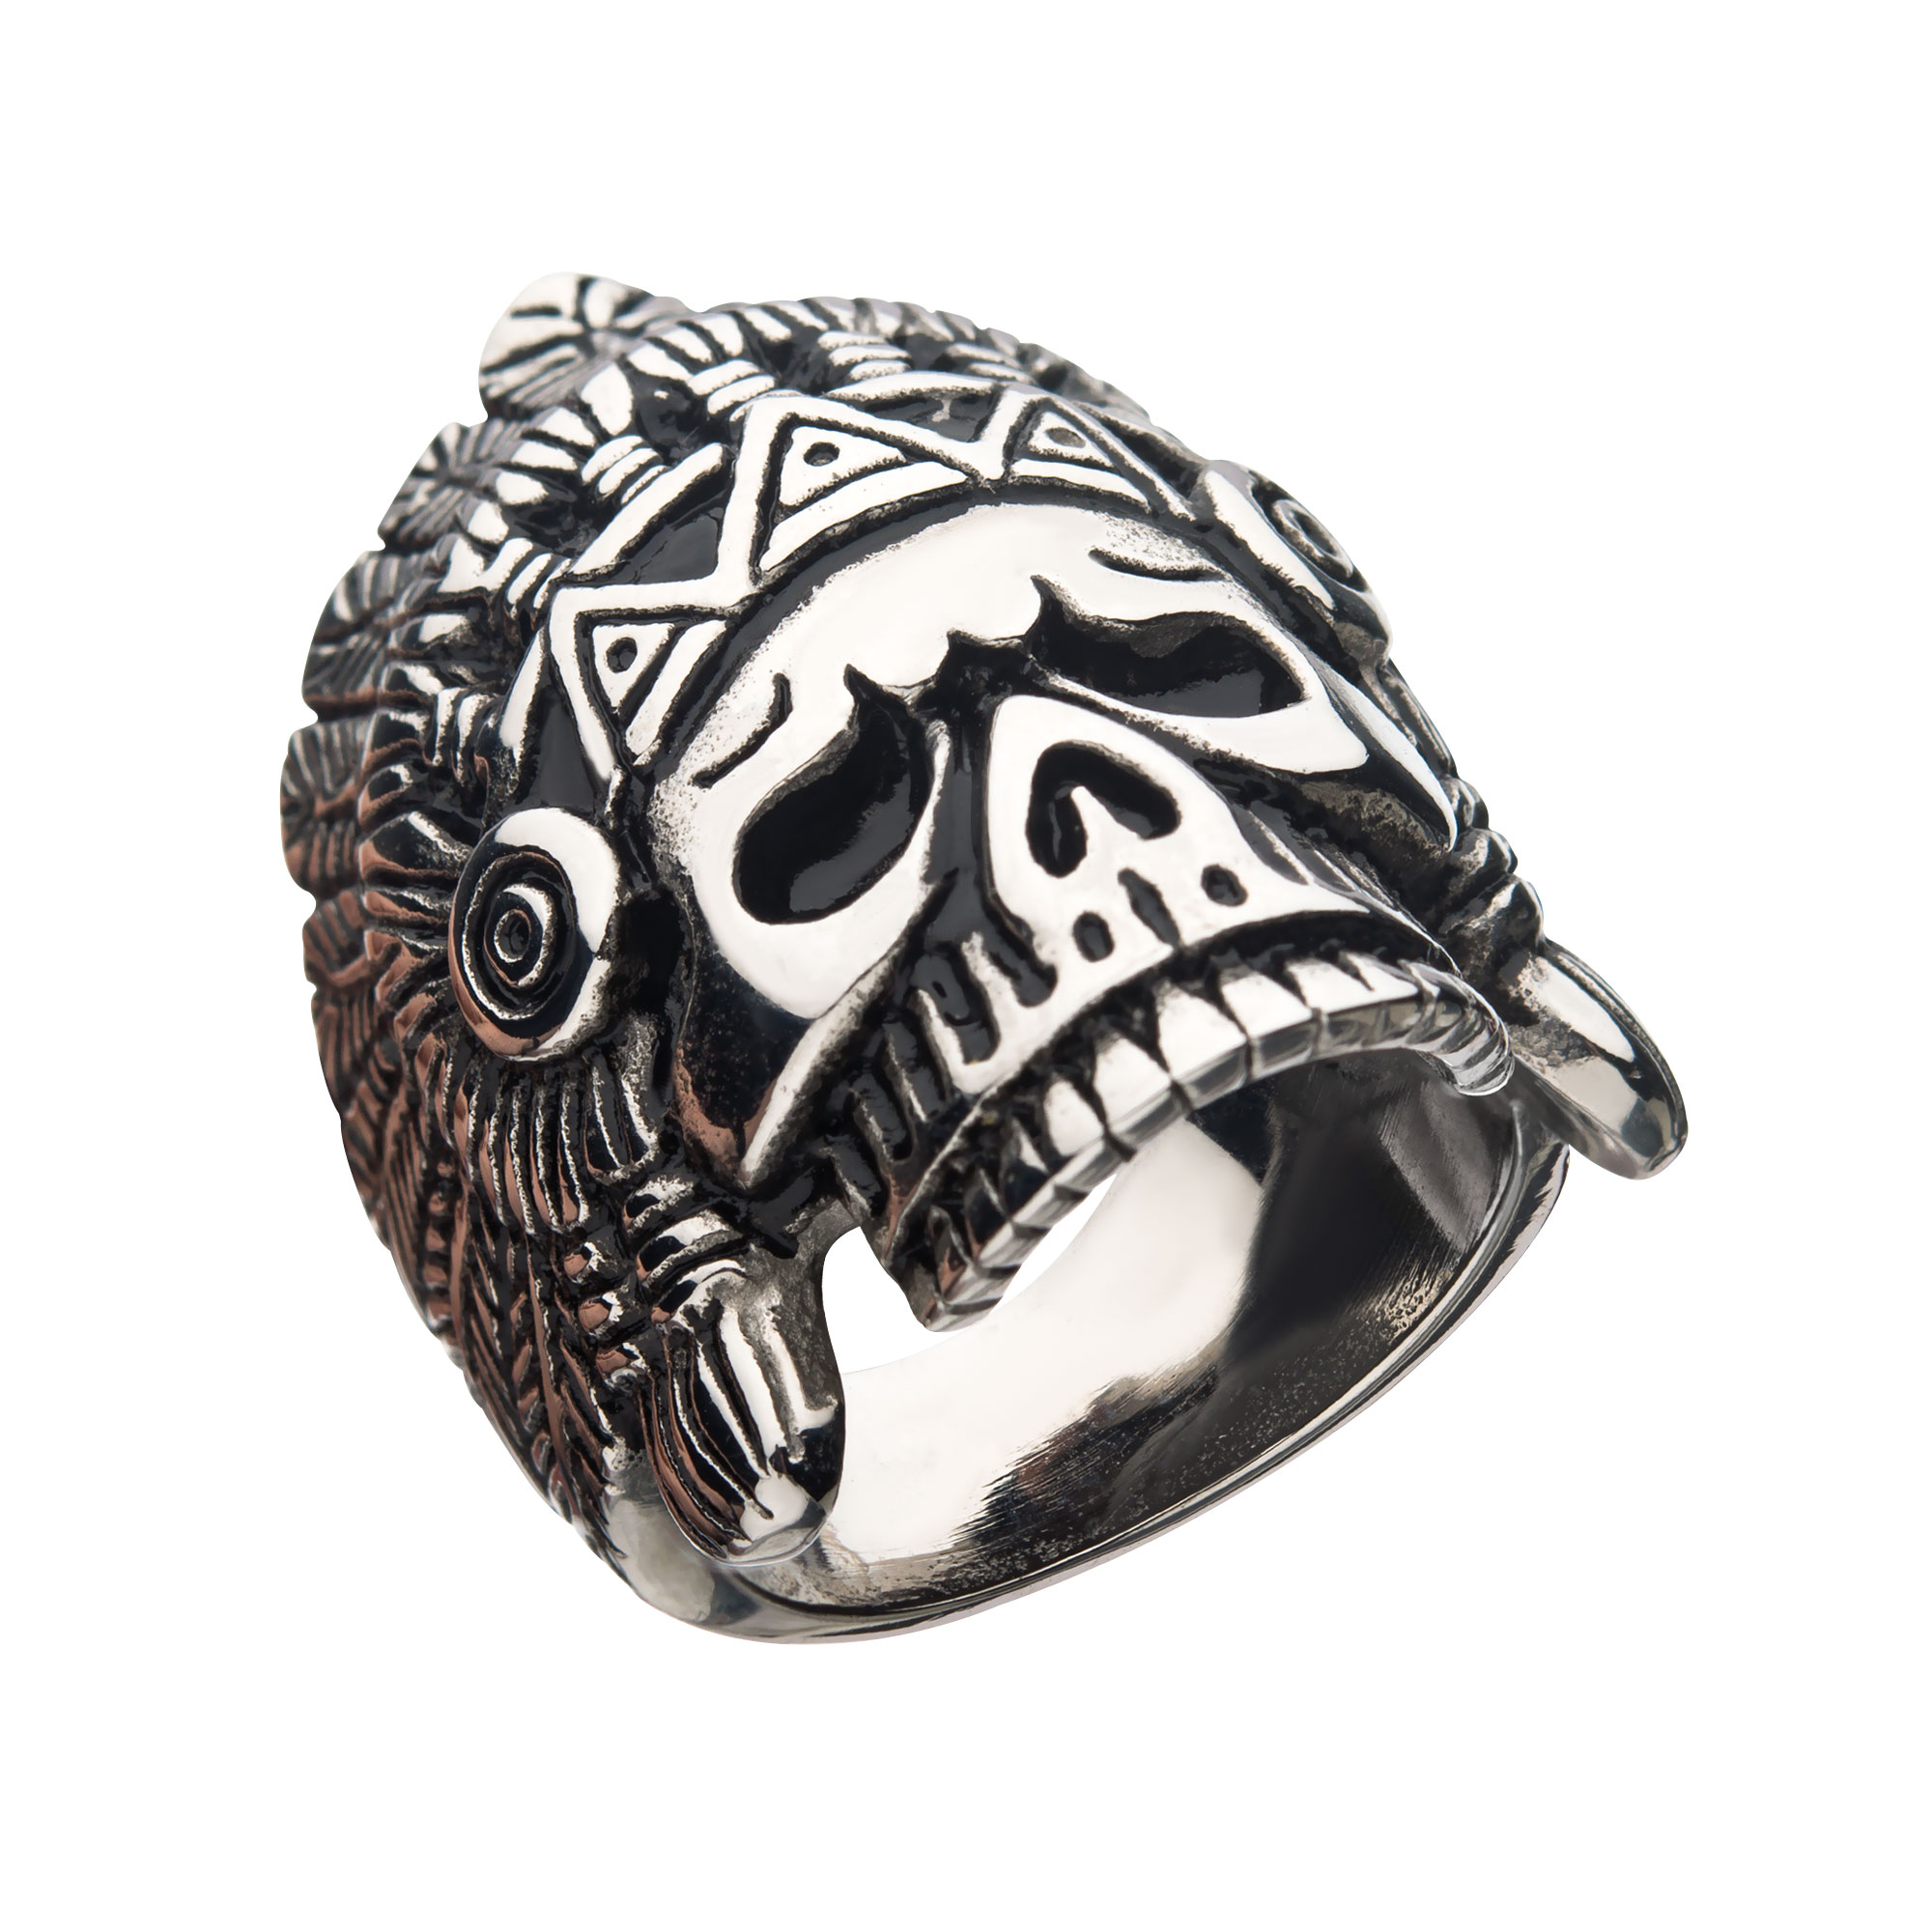 Oxidized Stainless Steel Chief Skull Ring Enchanted Jewelry Plainfield, CT